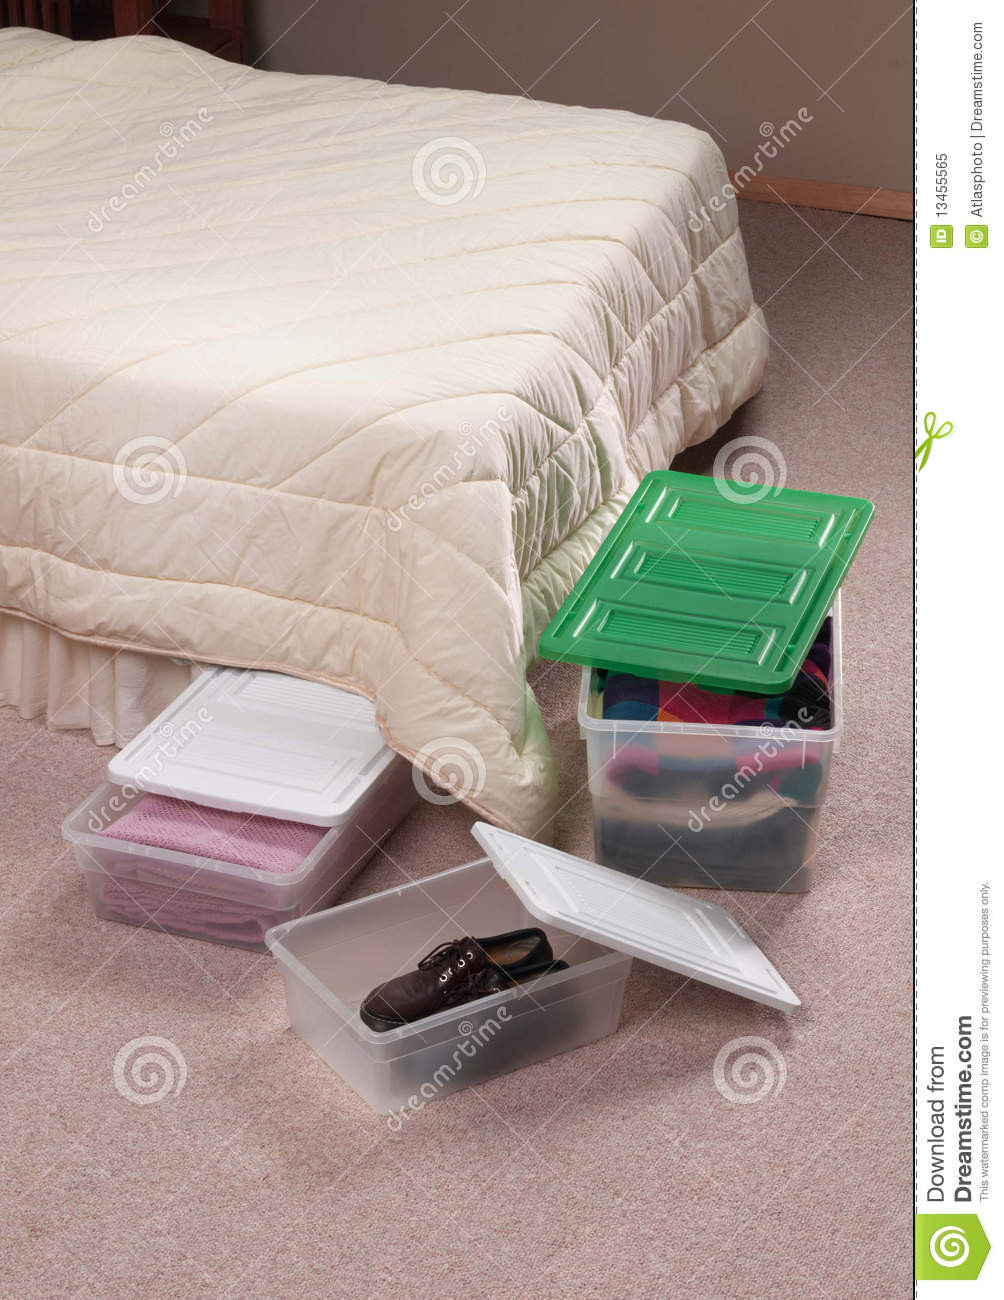 Bedroom Storage Containers
 Bedroom Storage Containers Royalty Free Stock